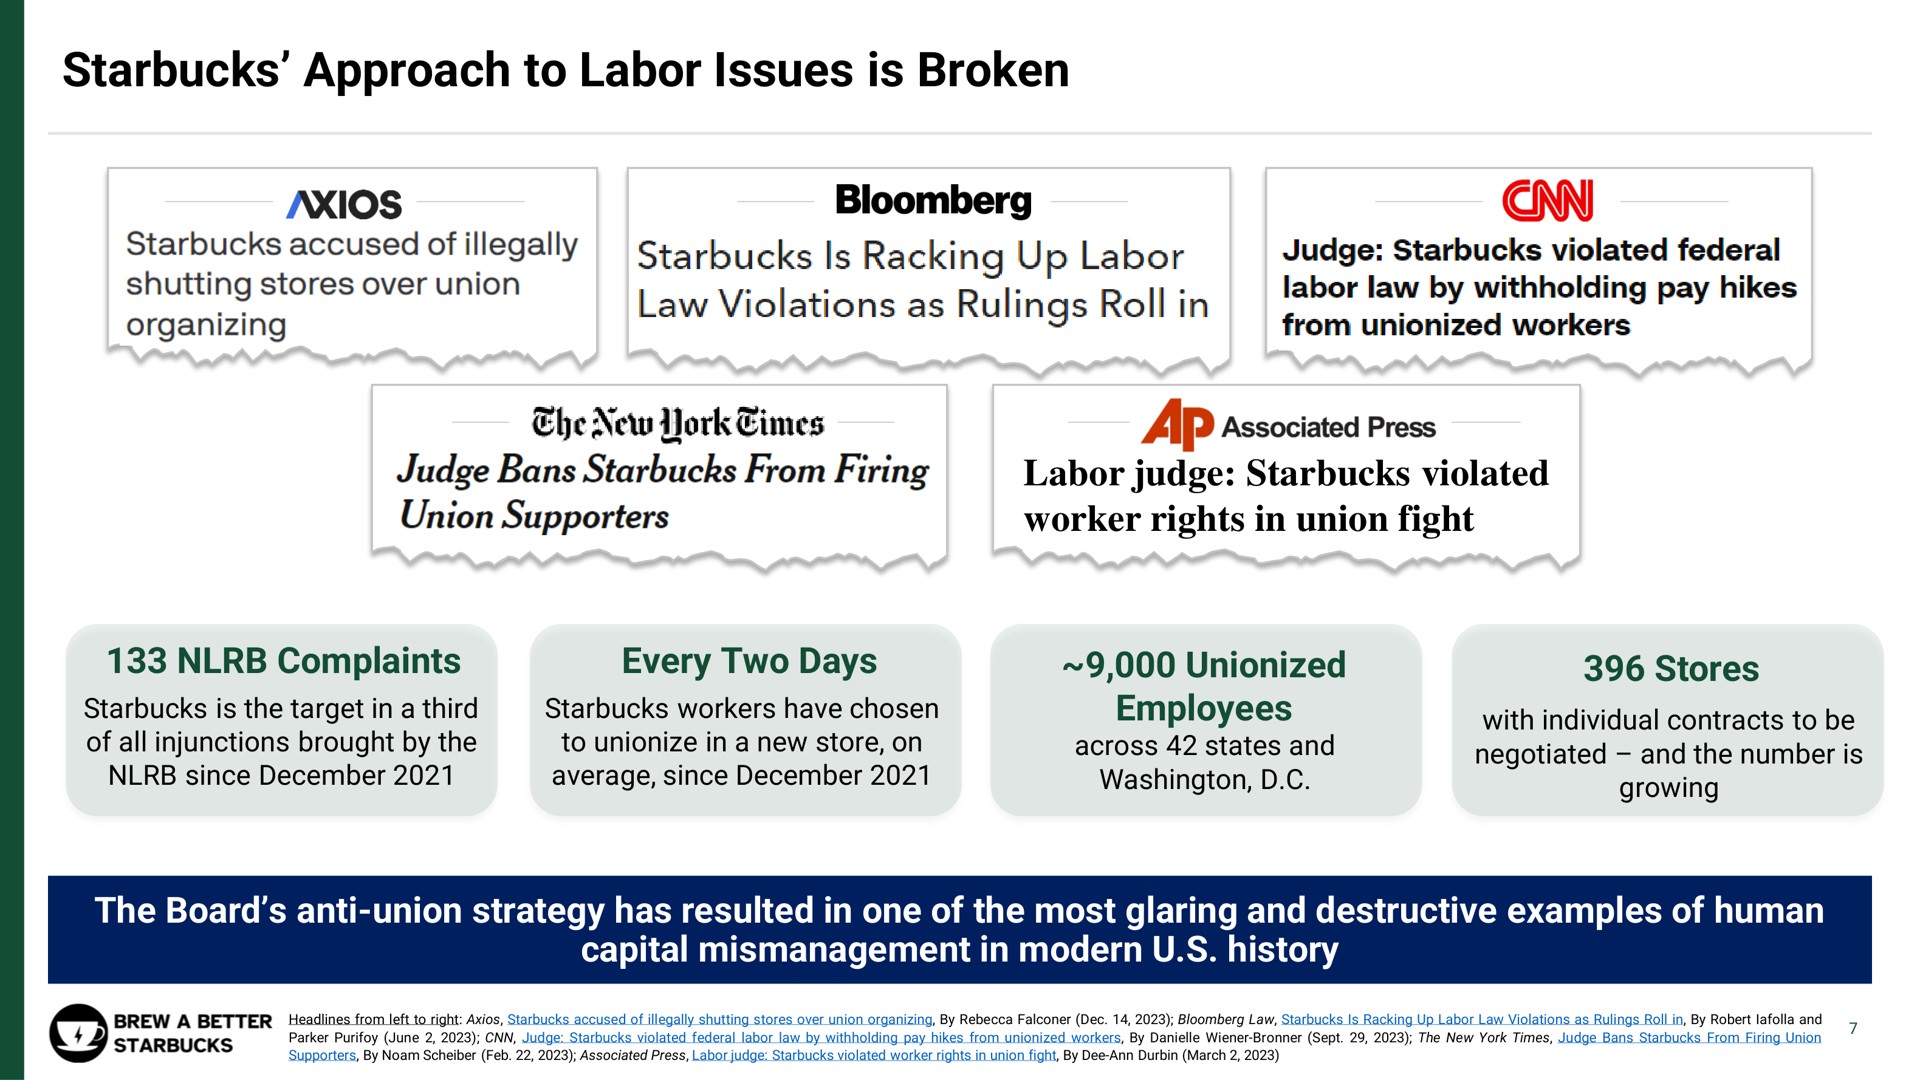 approach to labor issues is broken | Strategic Organizing Center